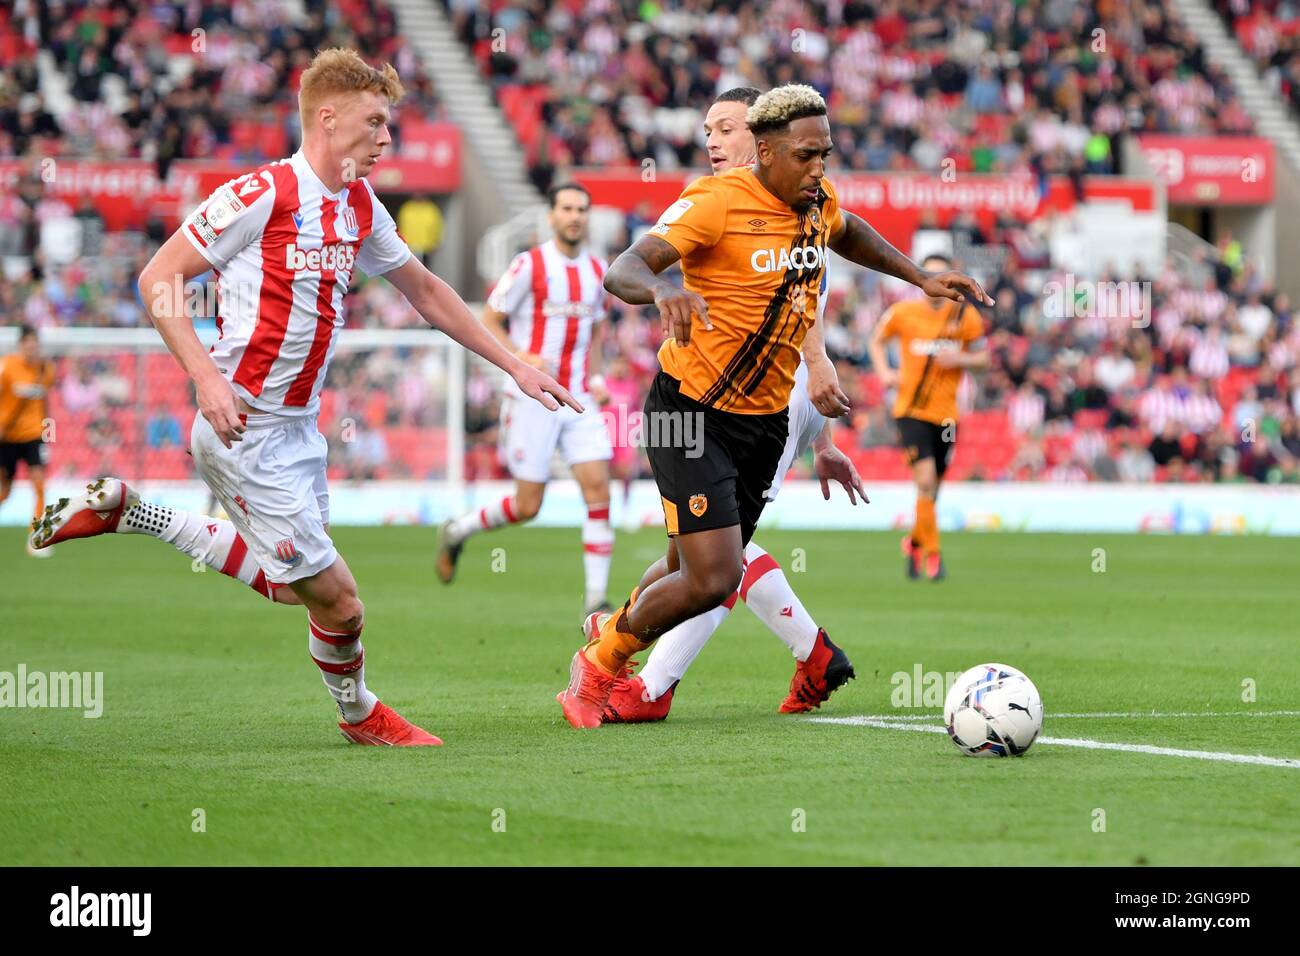 Hull City's Mallik Wilks is challenged by Stoke City's James Chester (hidden) during the Sky Bet Championship match at the bet365 Stadium, Stoke. Picture date: Saturday September 25, 2021. Stock Photo